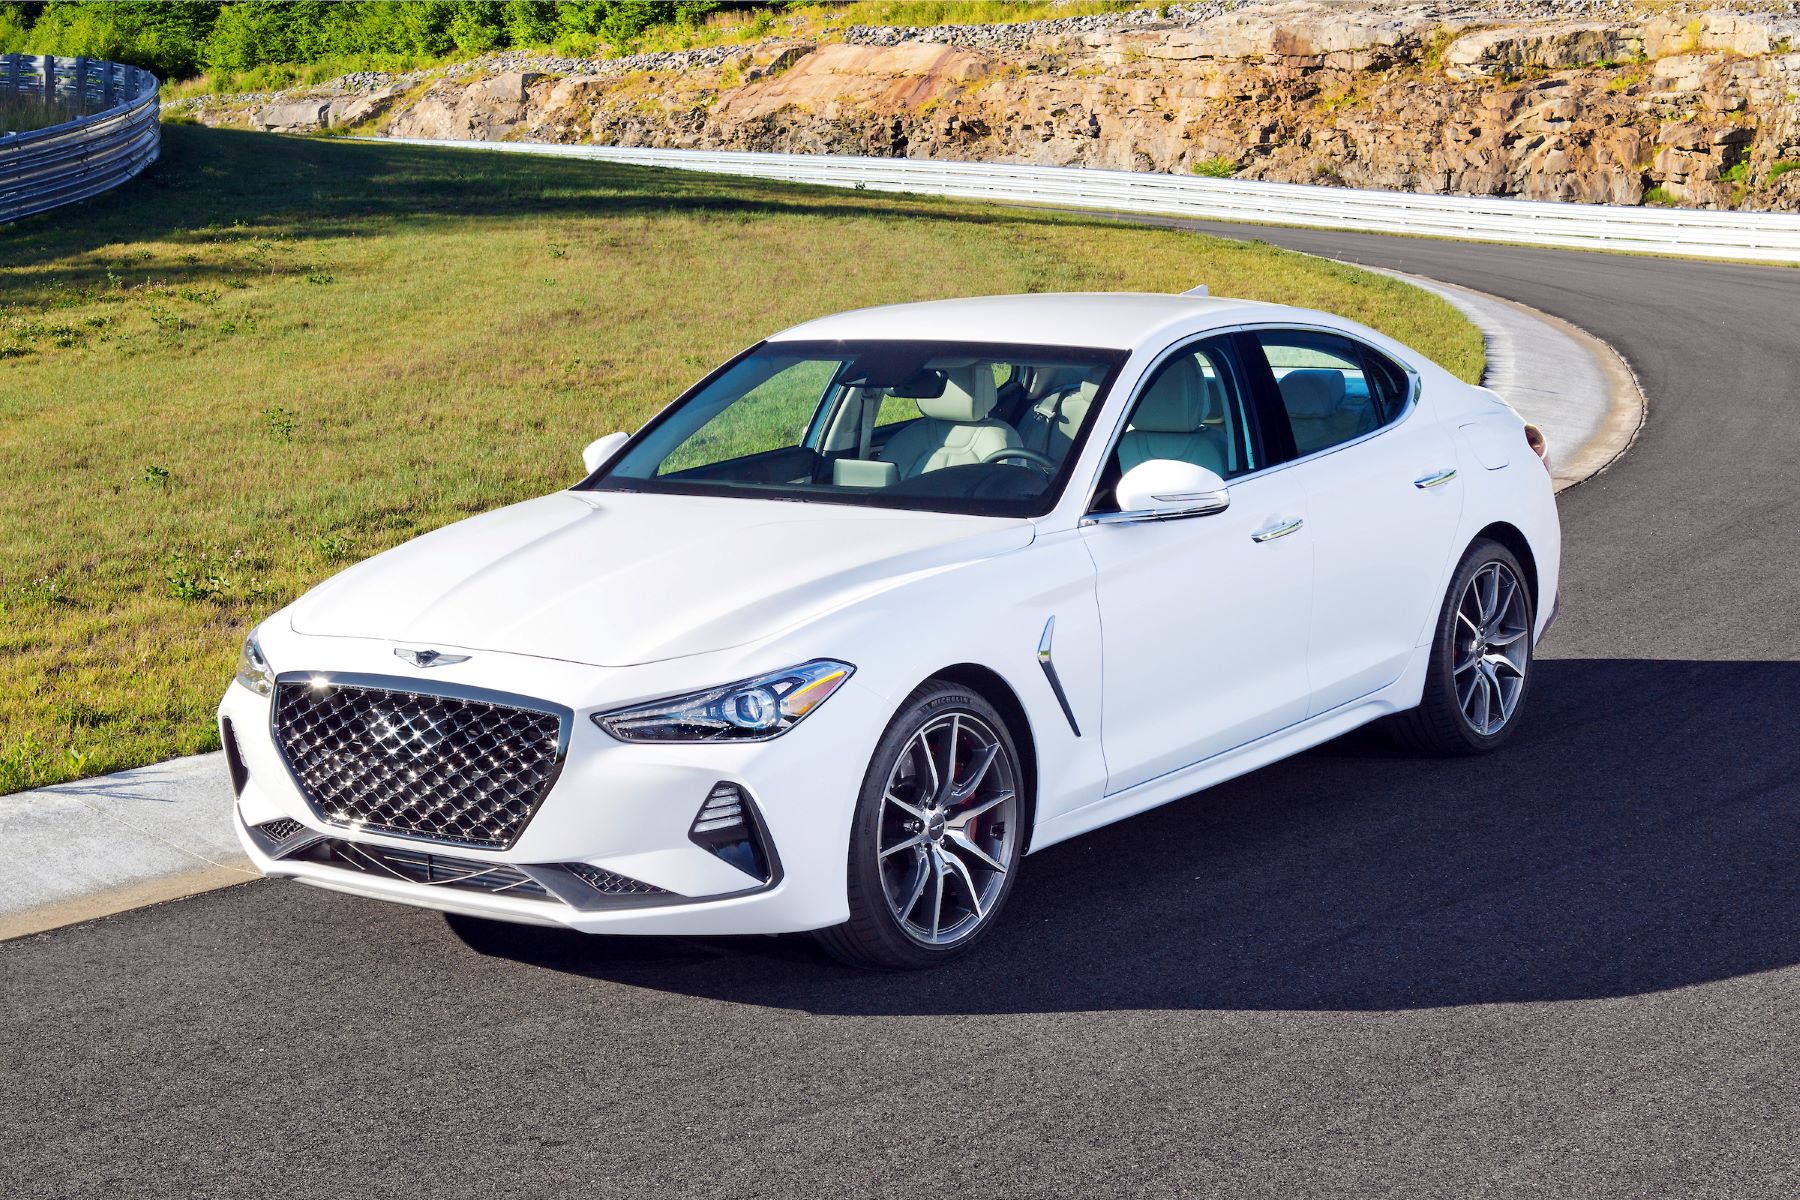 A white Genesis G70, reported as one of the most satisfying vehicles in the South by Consumer Reports